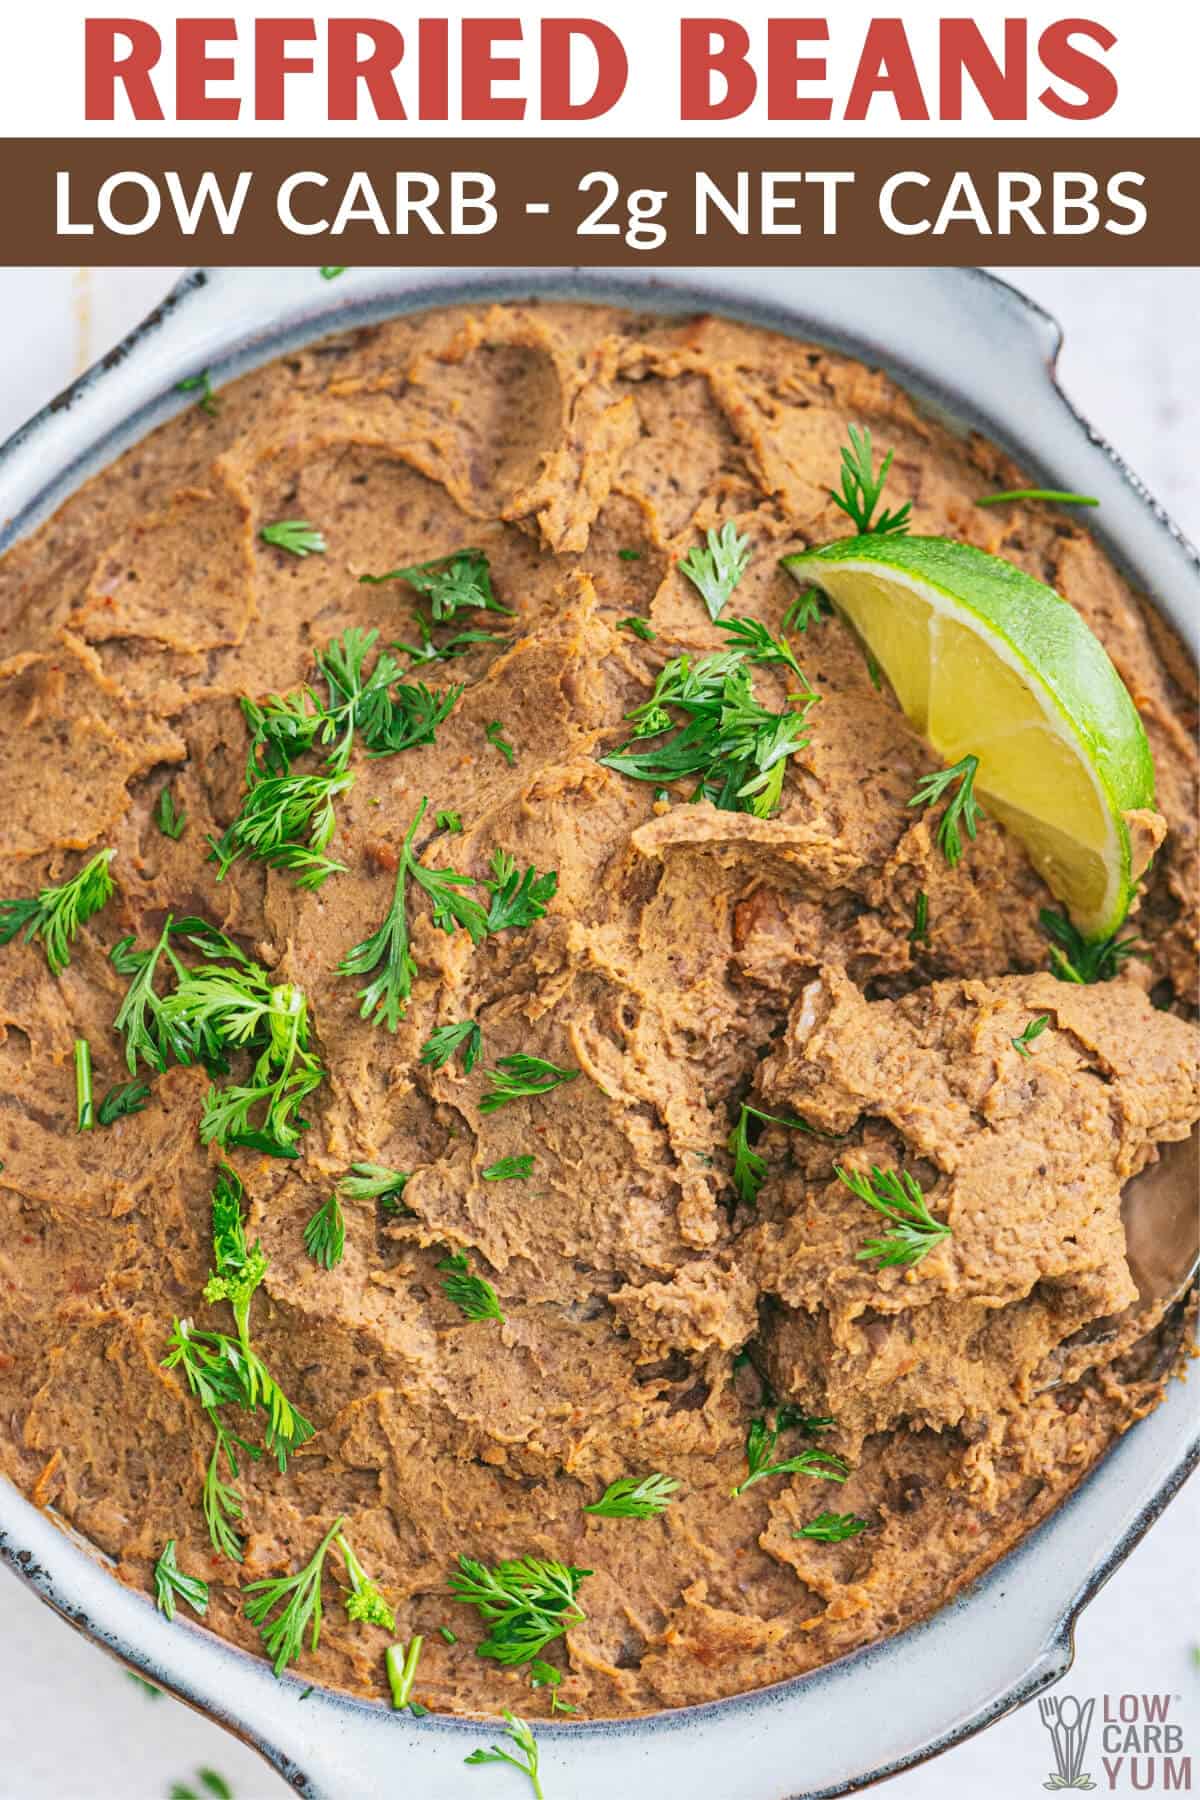 low-carb refried beans recipe